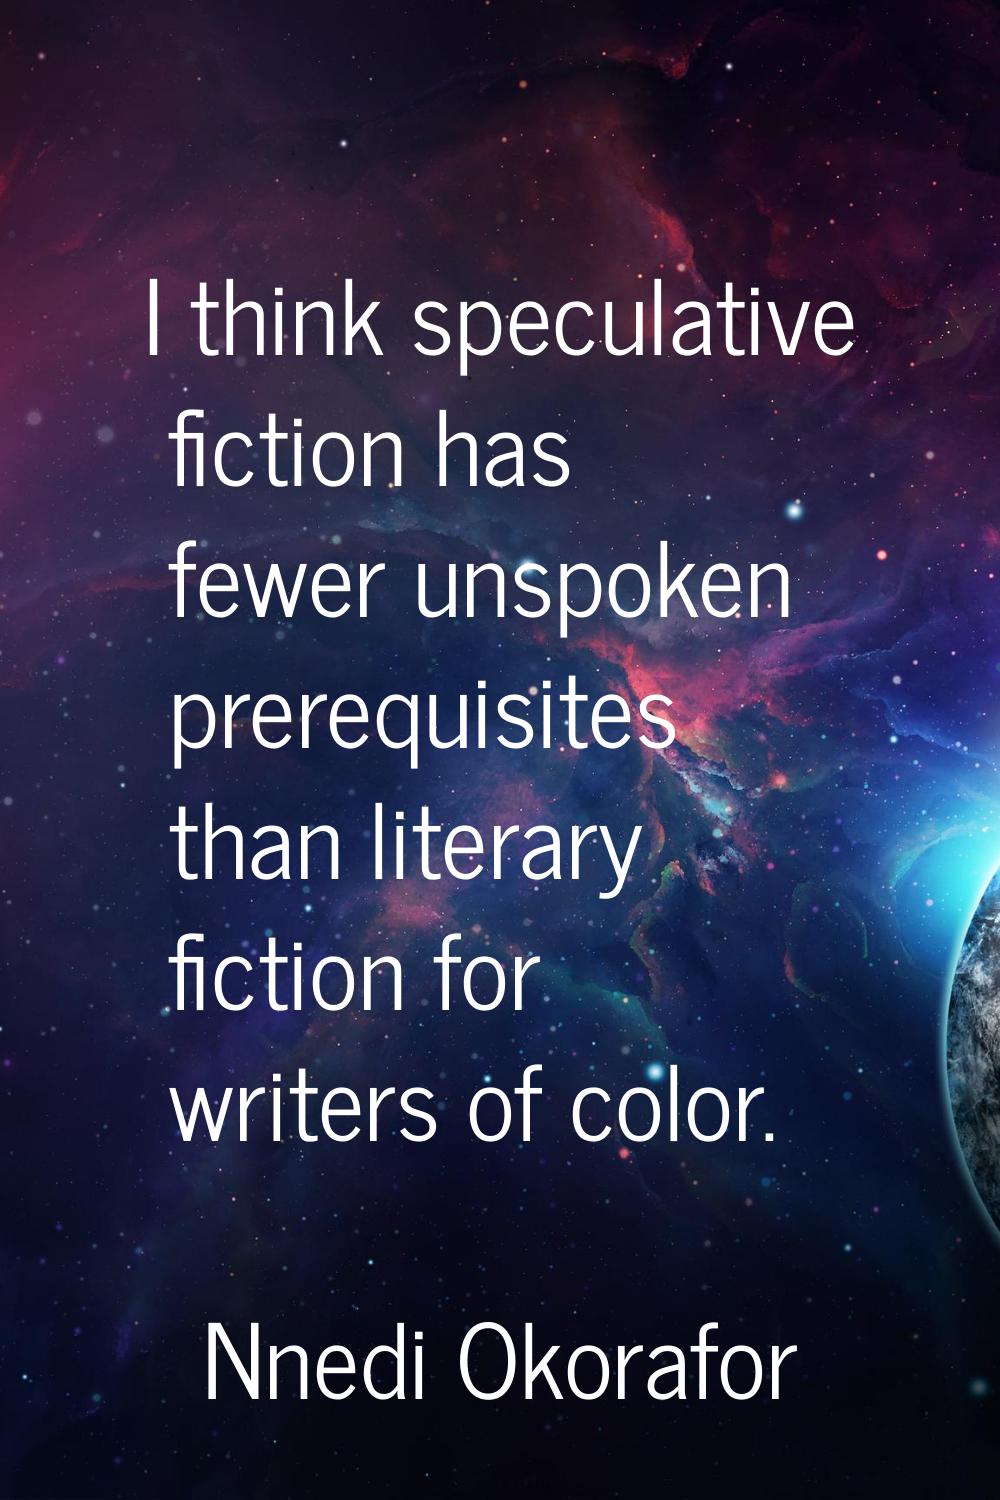 I think speculative fiction has fewer unspoken prerequisites than literary fiction for writers of c